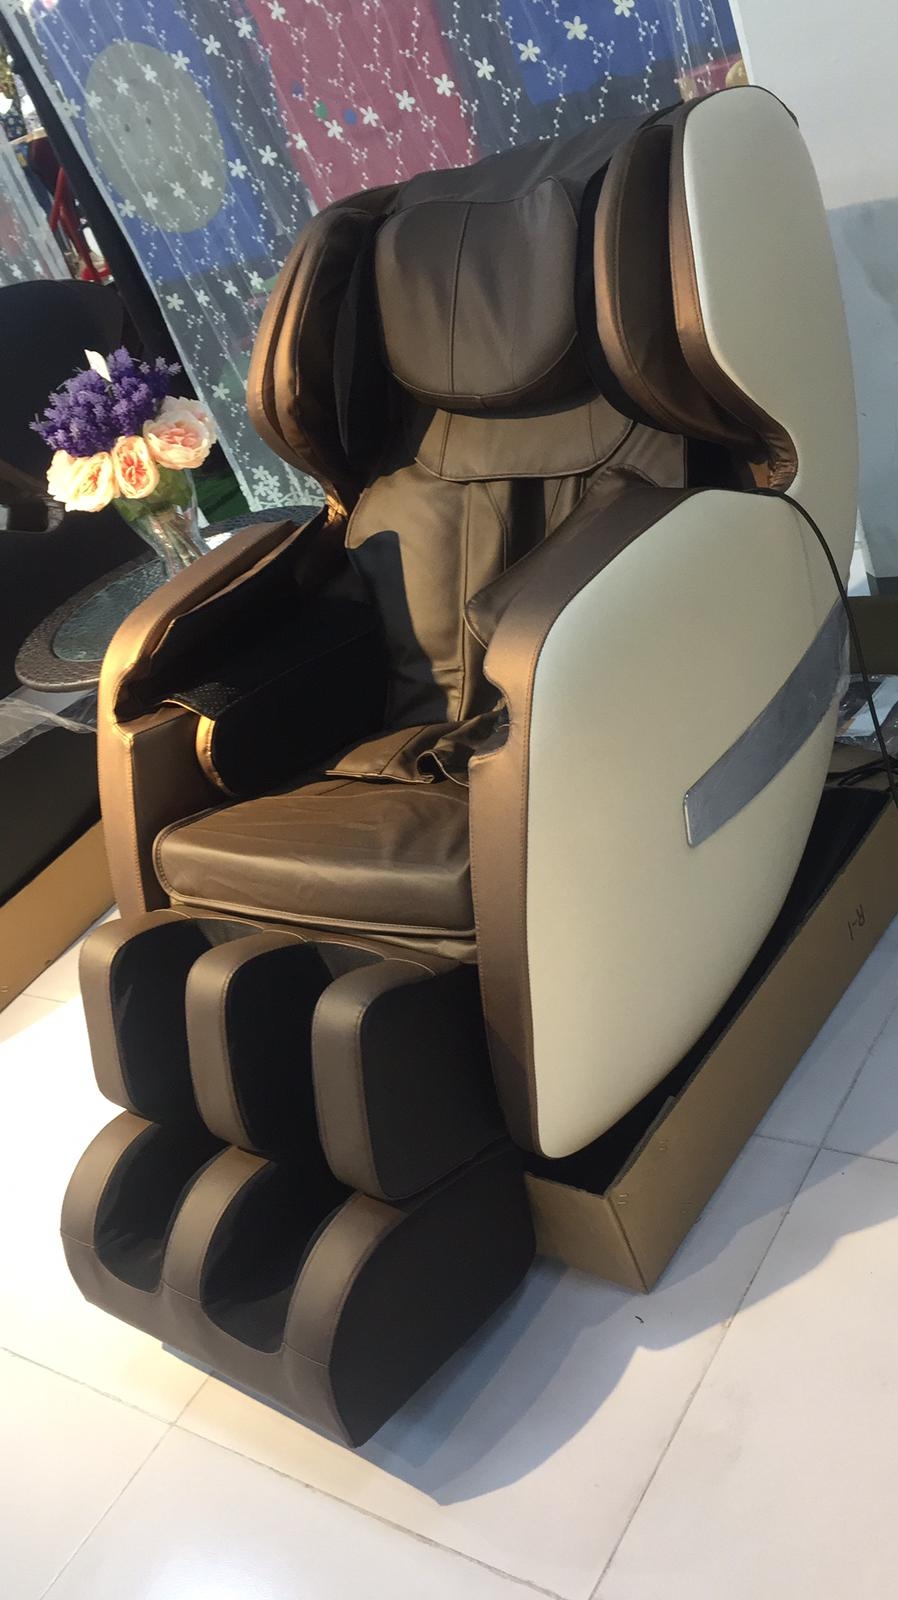 Massage Chair For Sale - Classifieds | Qatarbuyandsell.com